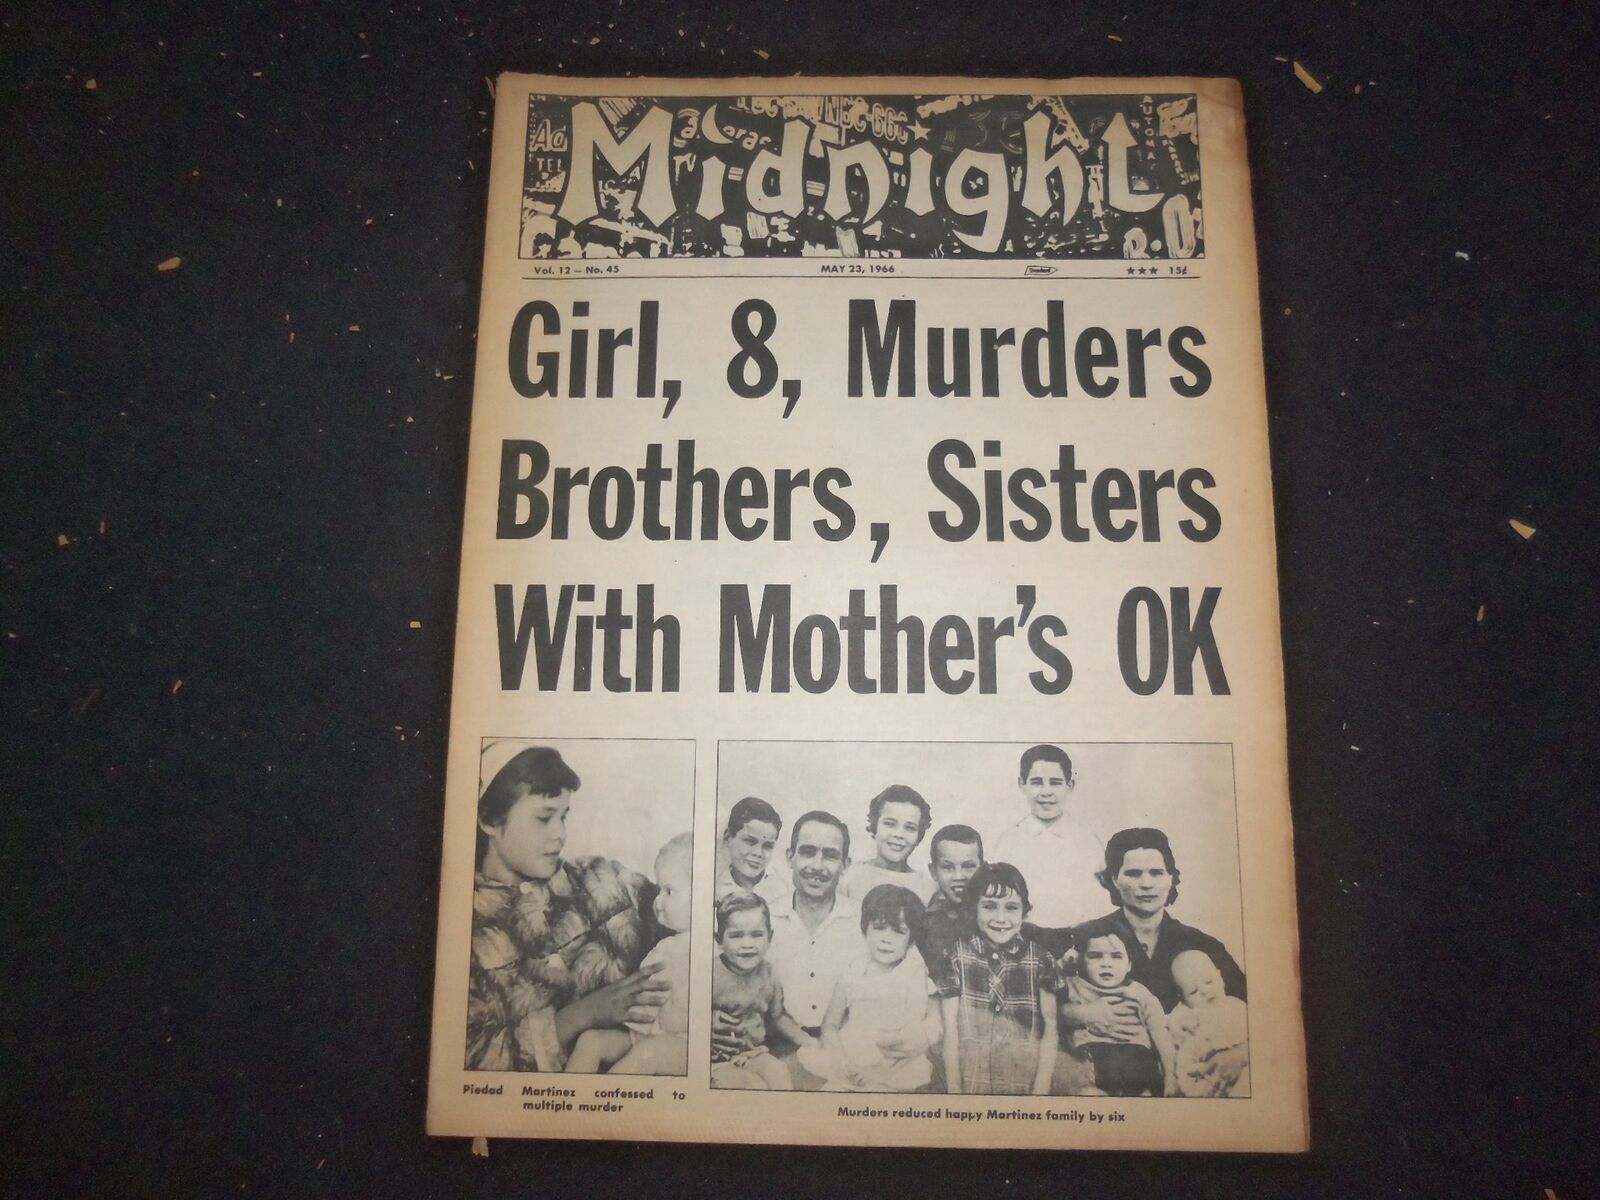 1966 MAY 23 MIDNIGHT NEWSPAPER - GIRL MURDERS BROTHERS & SISTERS - NP 7363